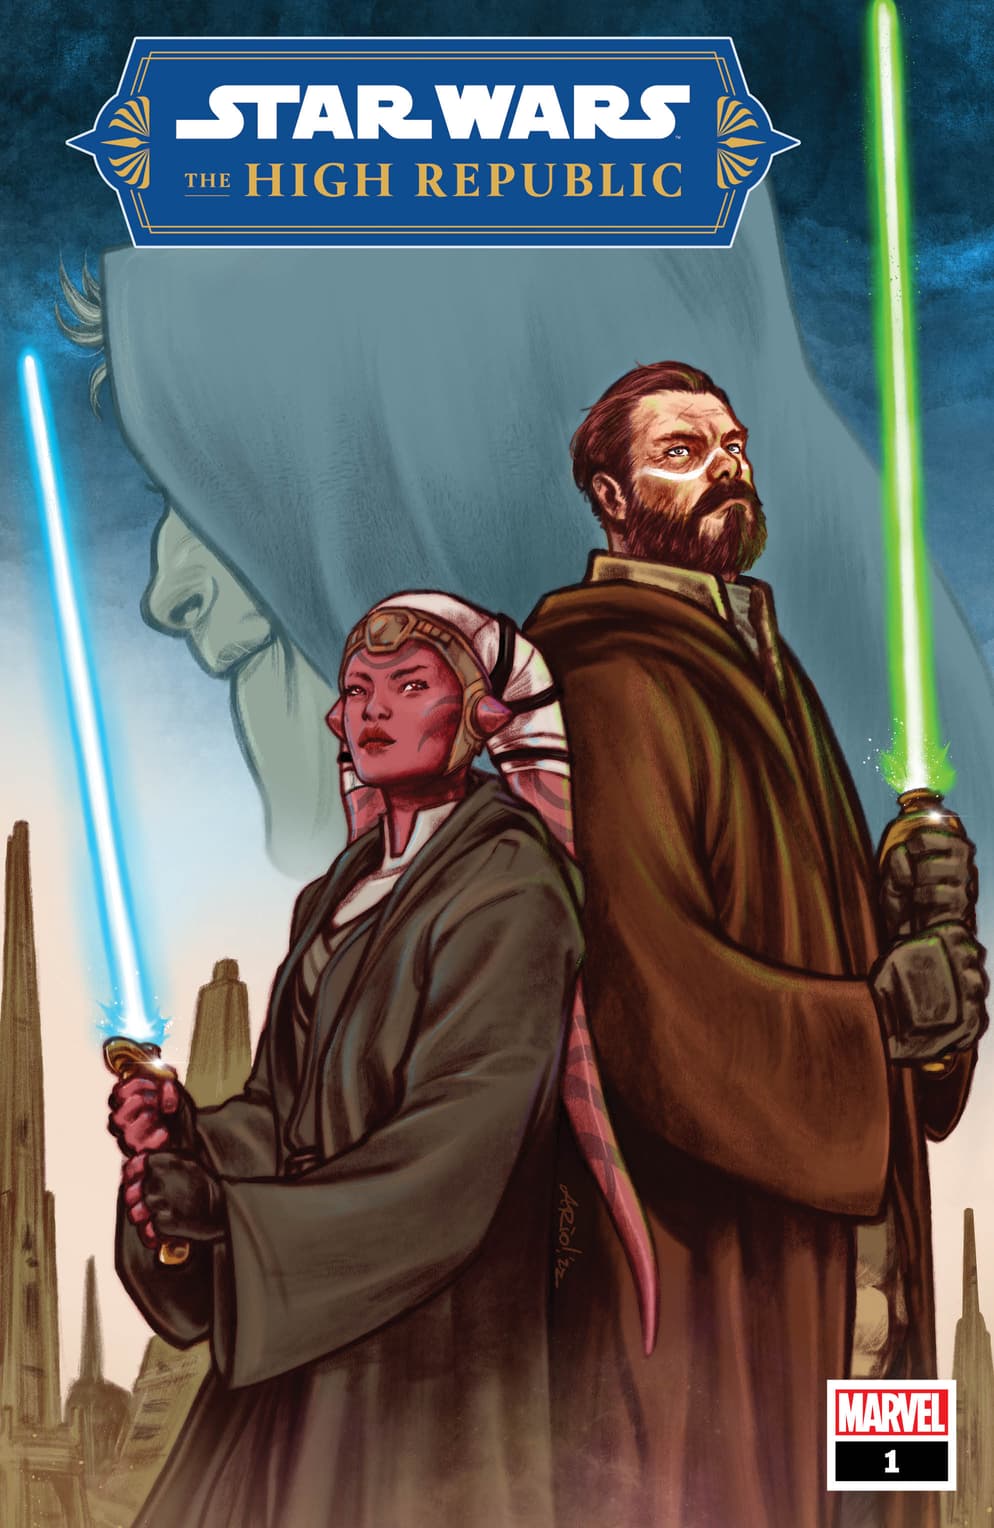 STAR WARS: THE HIGH REPUBLIC #1 cover by Ario Anindito